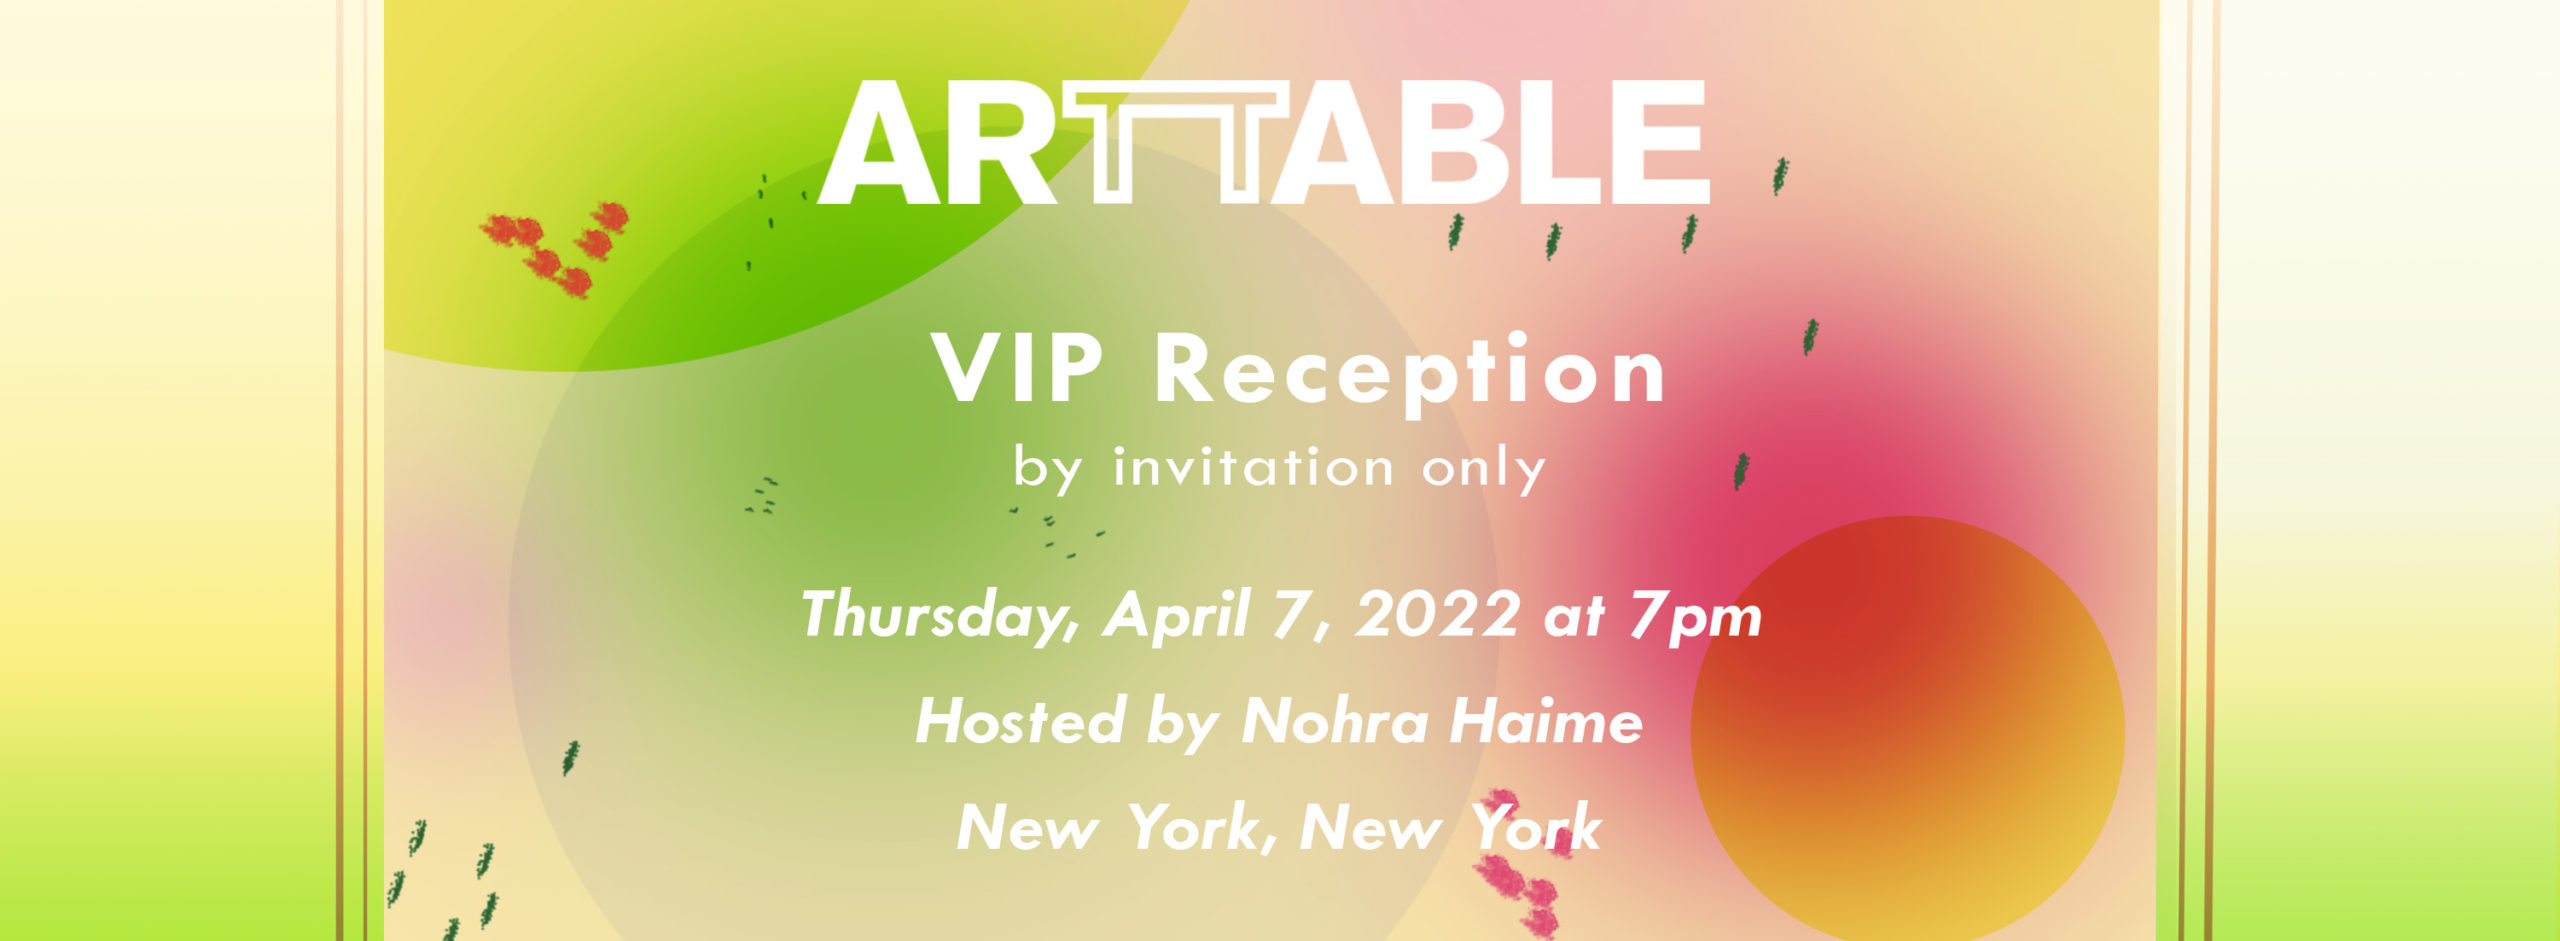 Benefit Week | VIP Reception Hosted by Nohra Haime